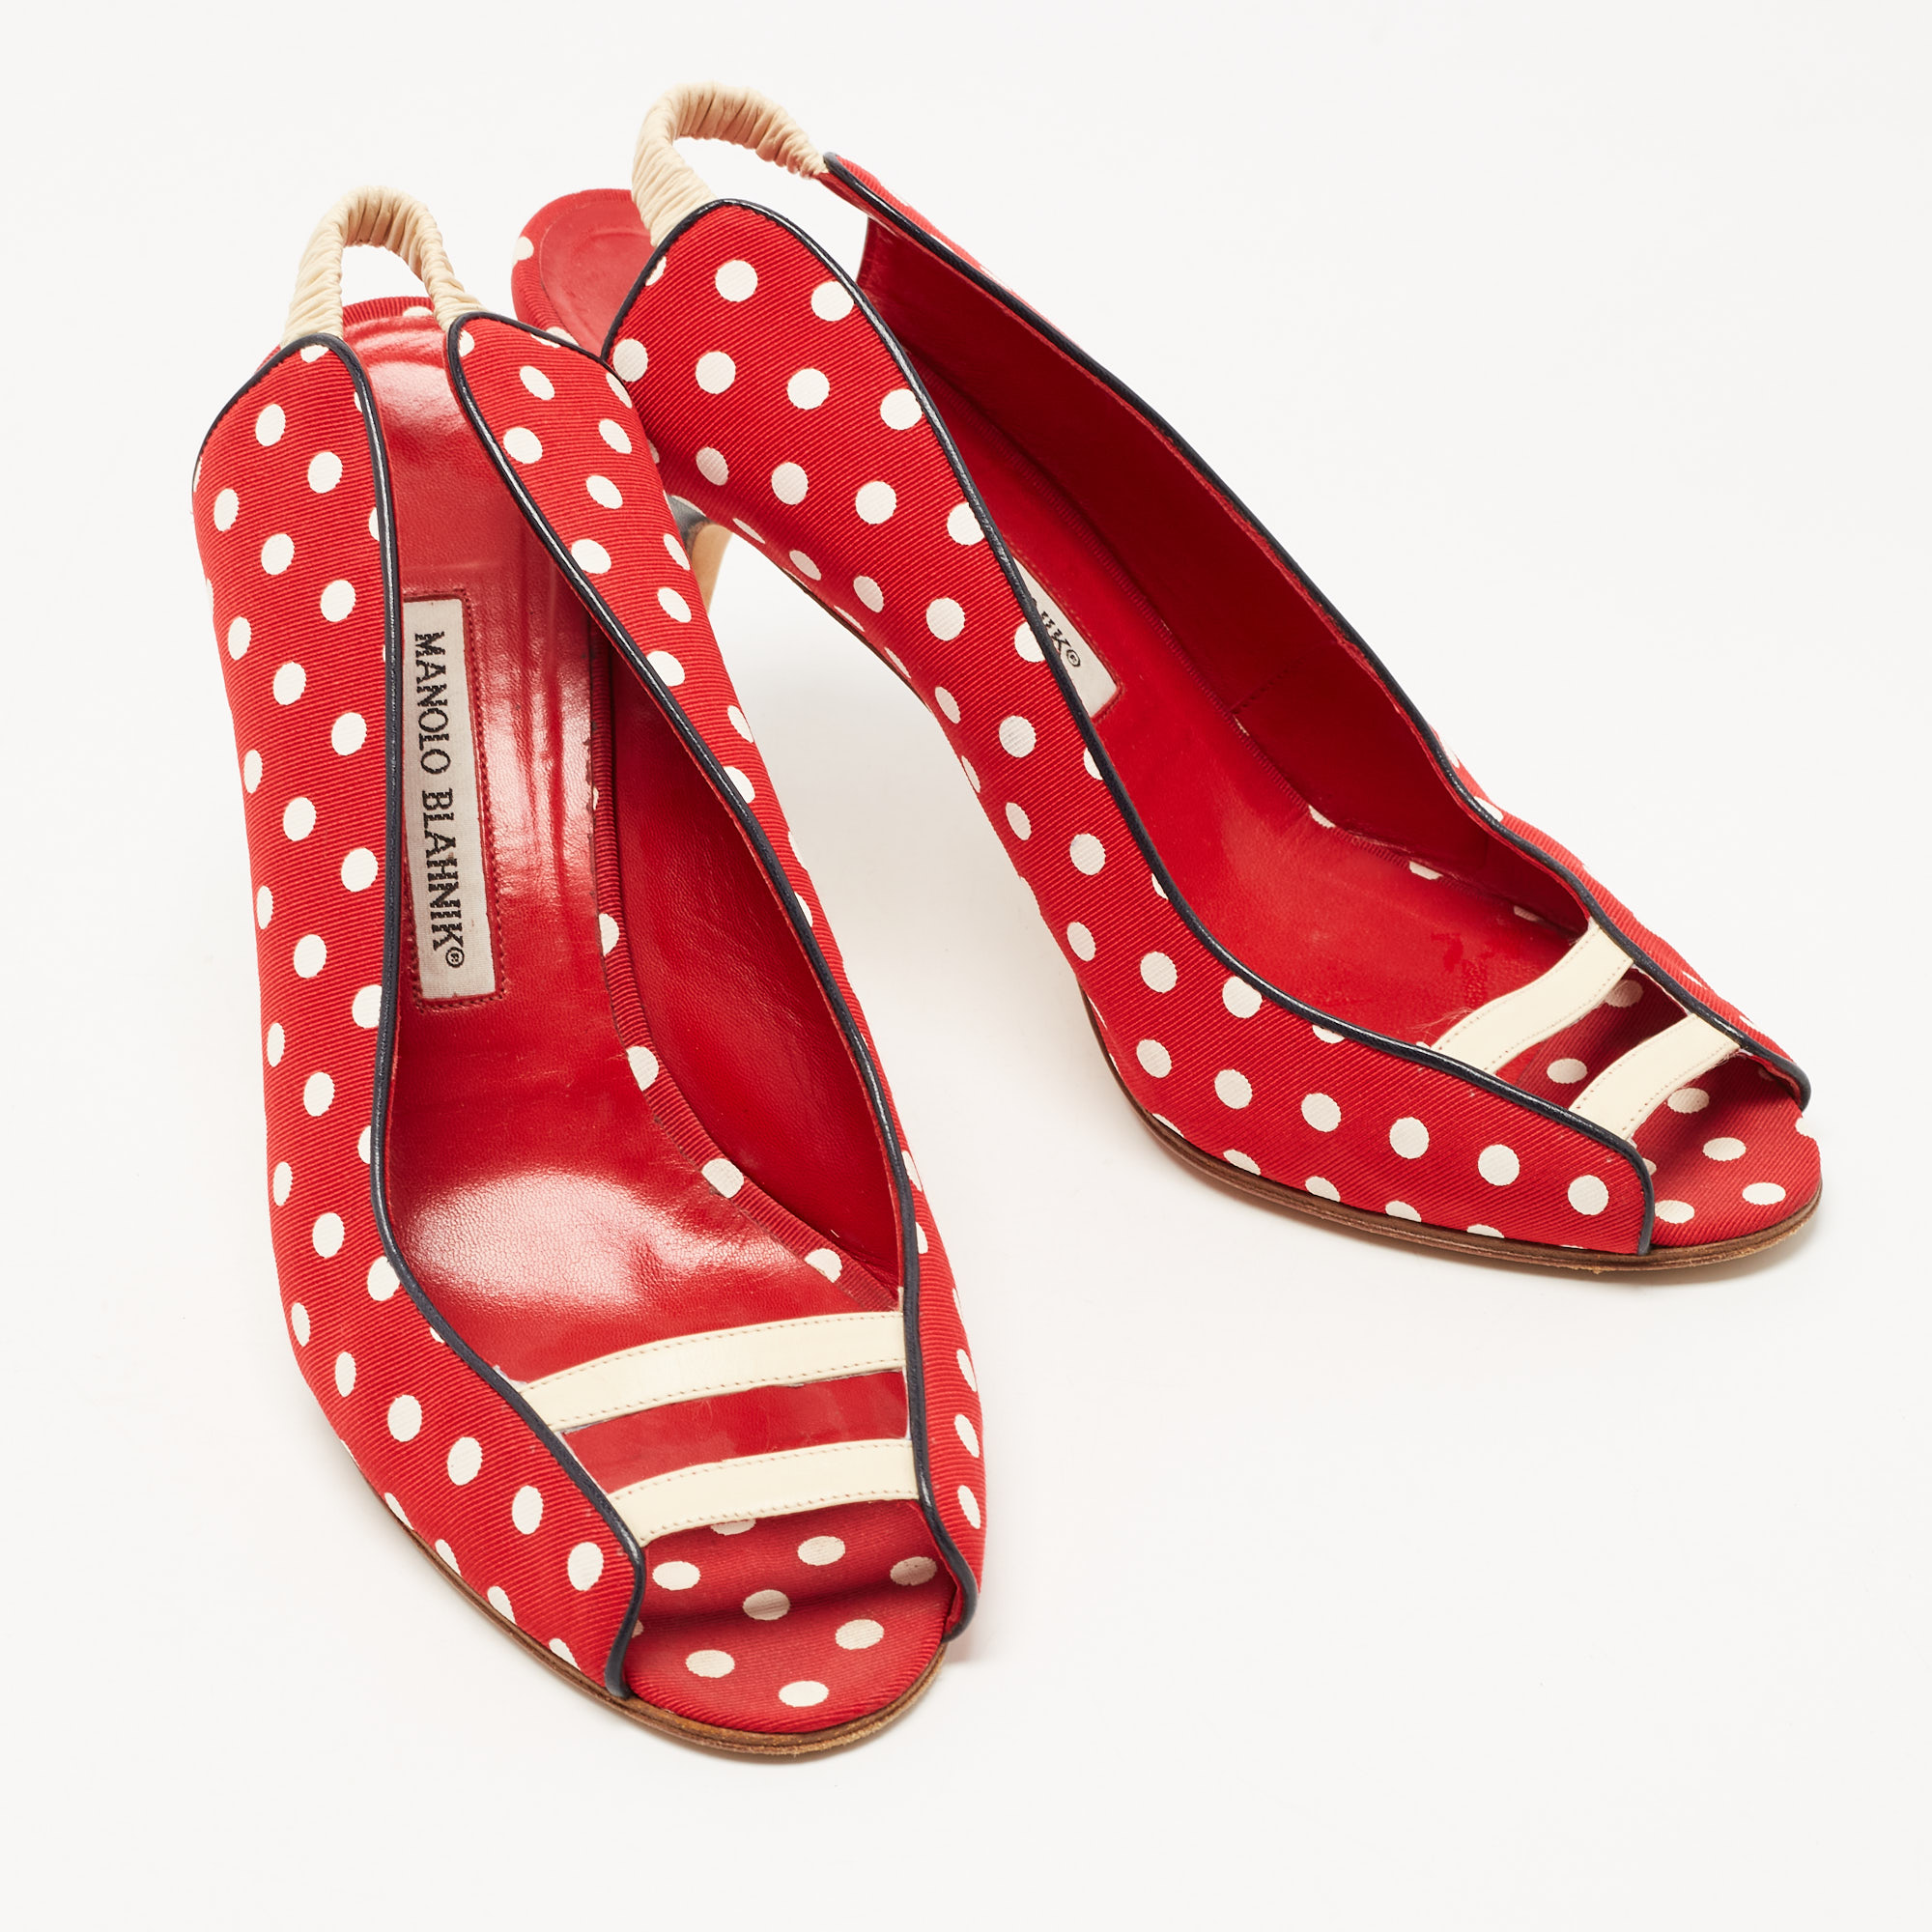 Manolo Blahnik Red Canvas And Leather Polka Dot Slingback Sandals Size 40